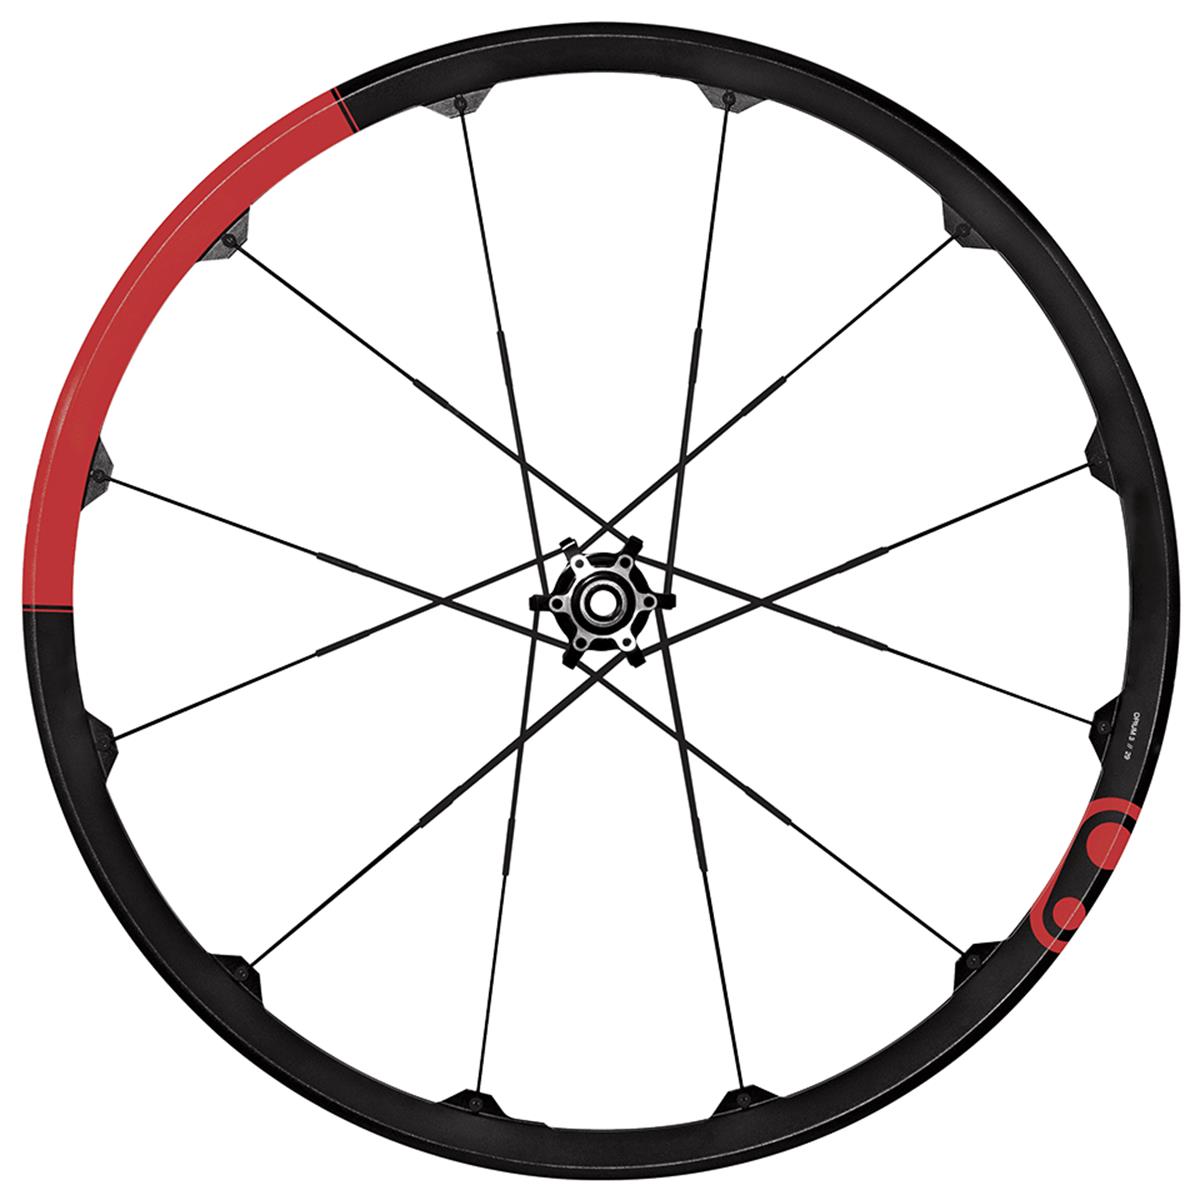 Crankbrothers Wheel Set Opium 3 Black/Red, 27.5 Inch, 20x110 mm/12x150 mm (12x157 mm), Tubeless Ready